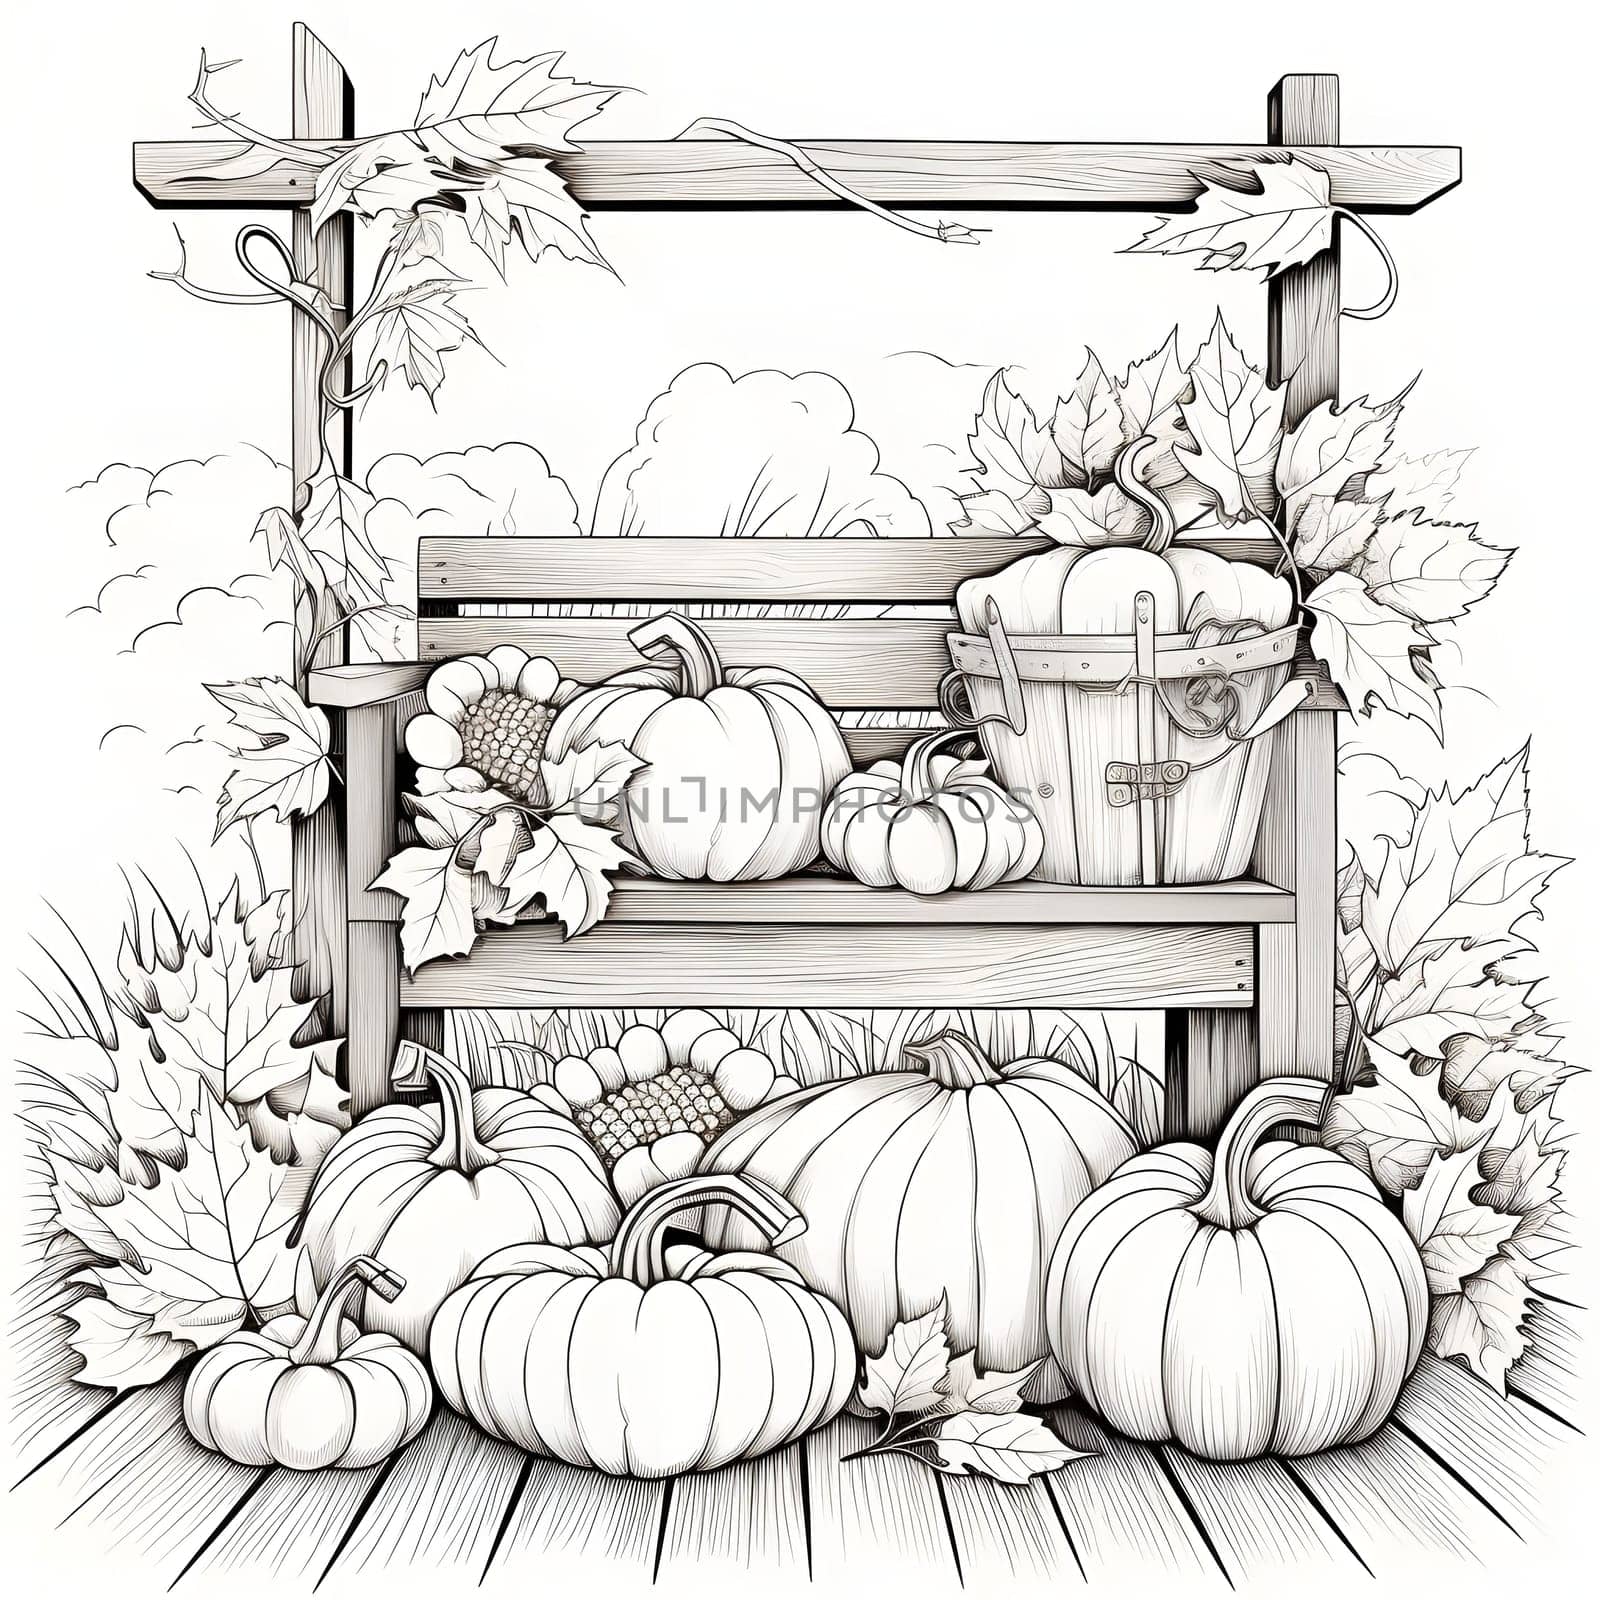 Black and White coloring book, wooden bench, pumpkin leaves bucket around. Pumpkin as a dish of thanksgiving for the harvest, picture on a white isolated background. Atmosphere of joy and celebration.